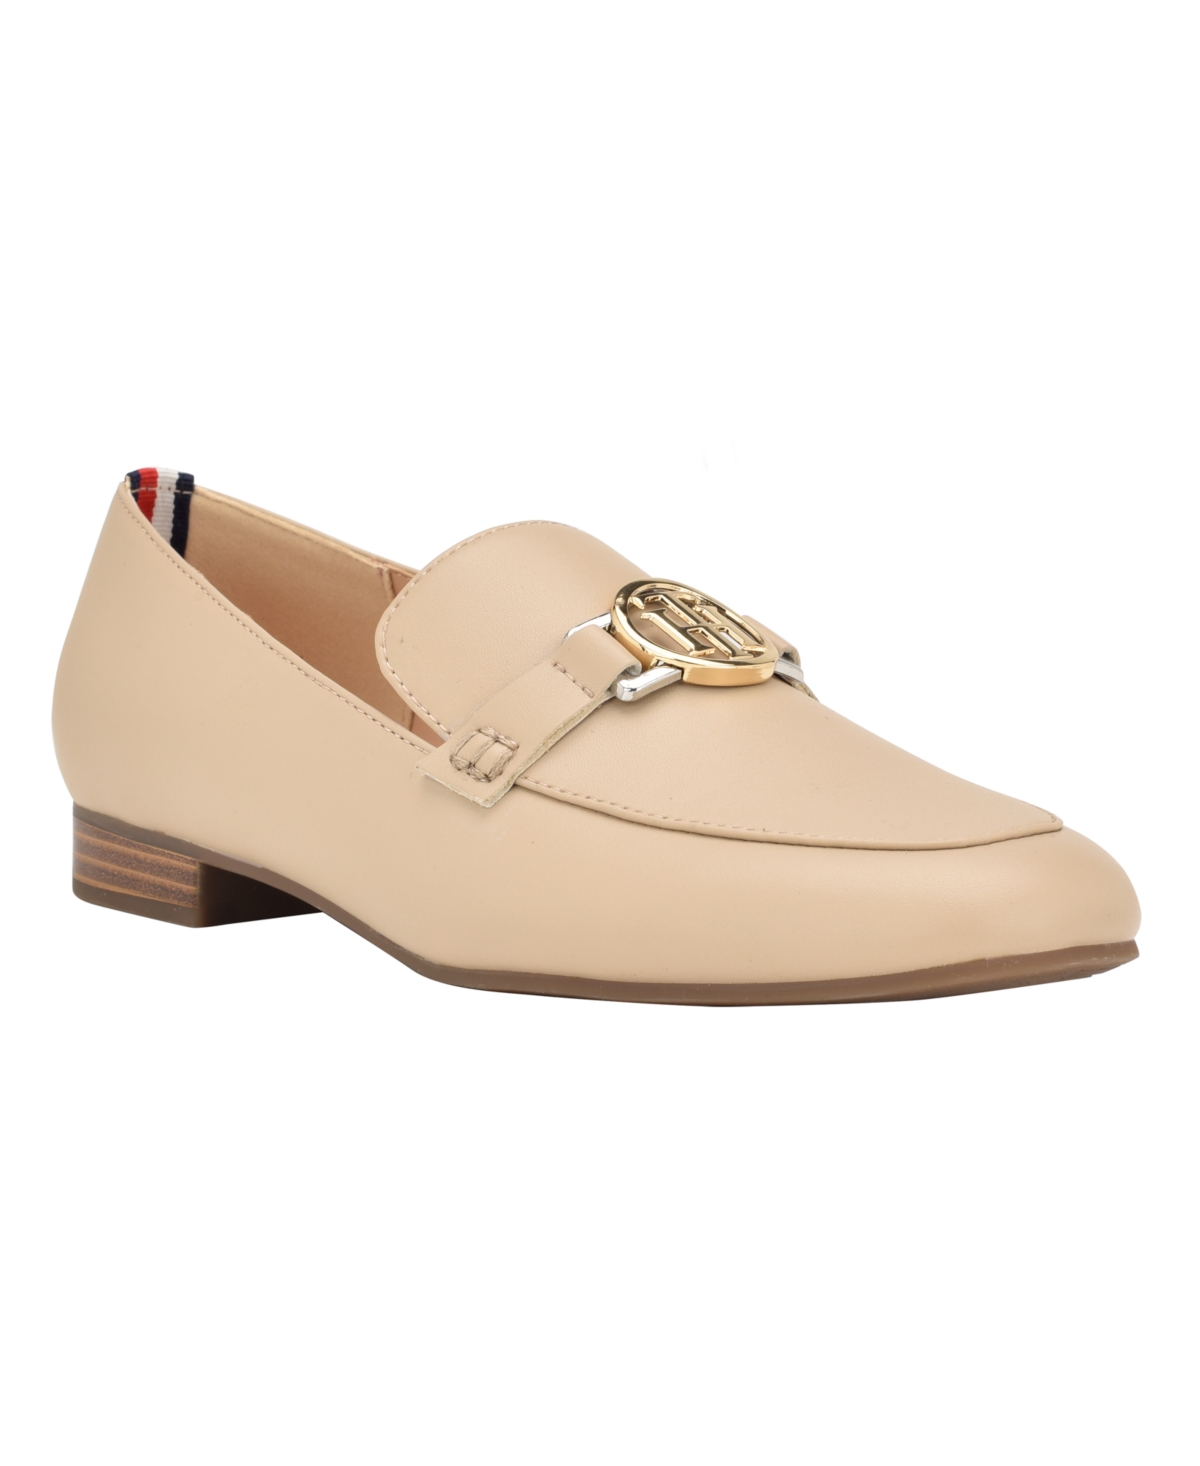 TOMMY HILFIGER WOMEN'S COZTE CLASSIC MOCCASINS LOAFERS